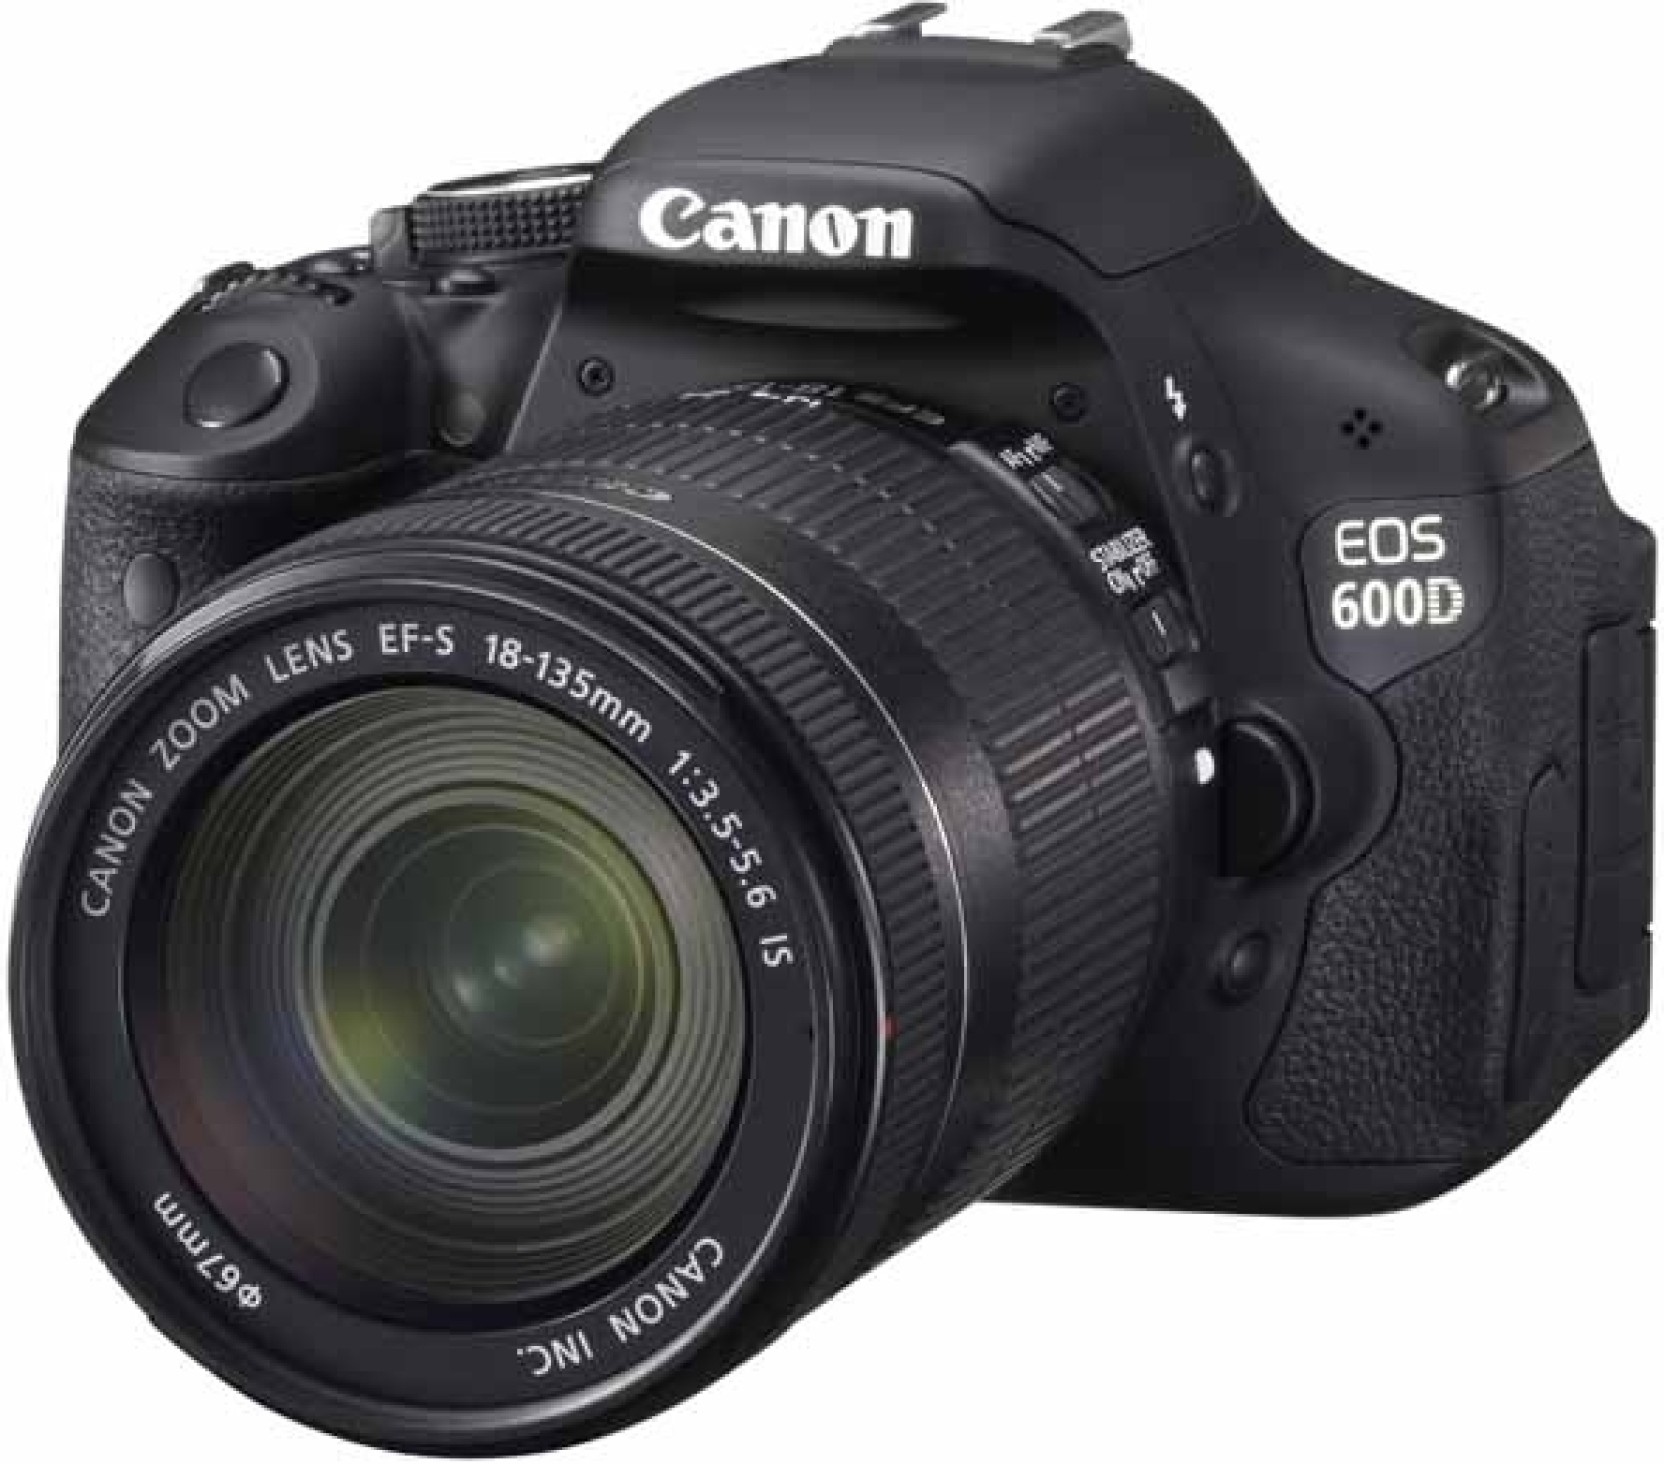  Canon EOS 600D  Body with EF S 18 135 mm IS II Lens DSLR 